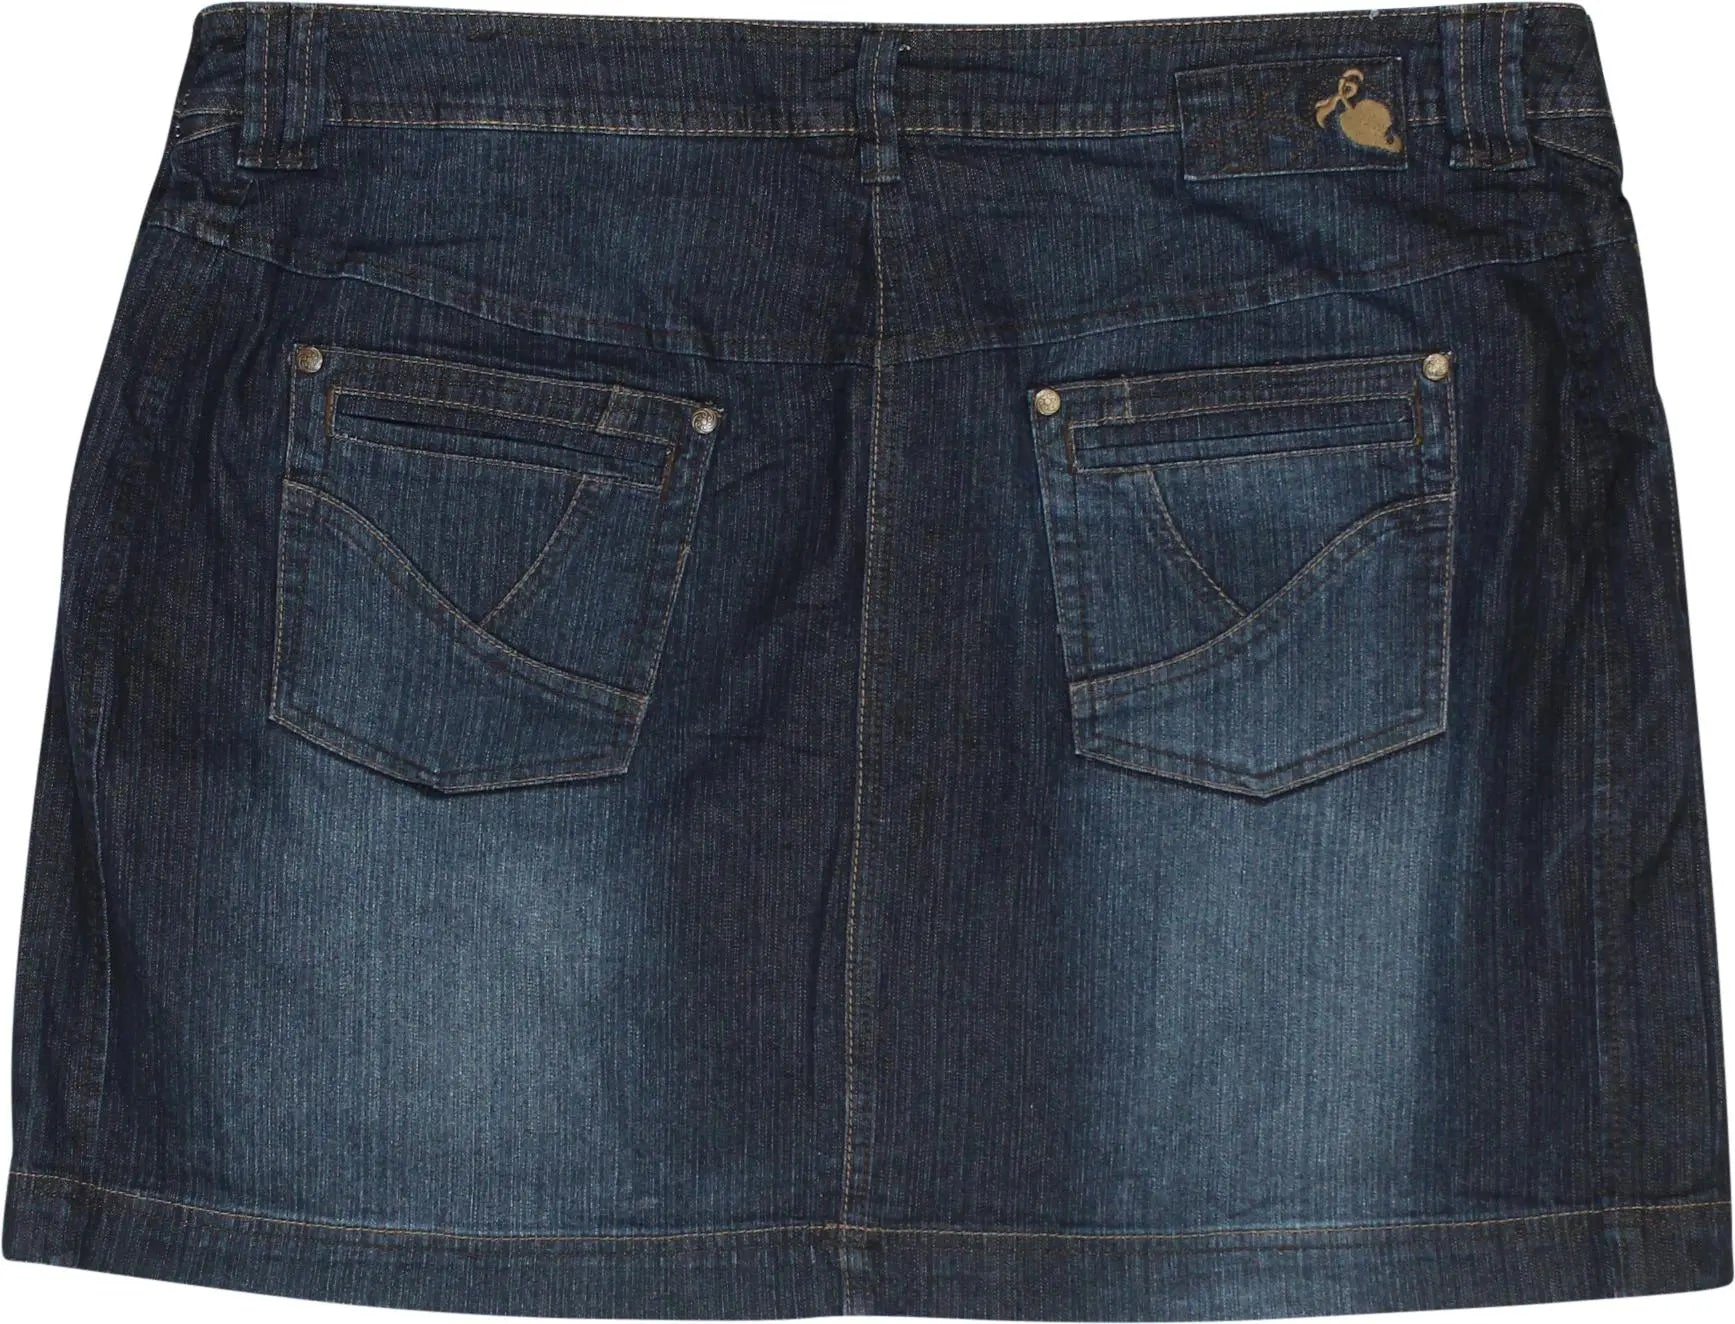 M&S - Denim mini skirt- ThriftTale.com - Vintage and second handclothing